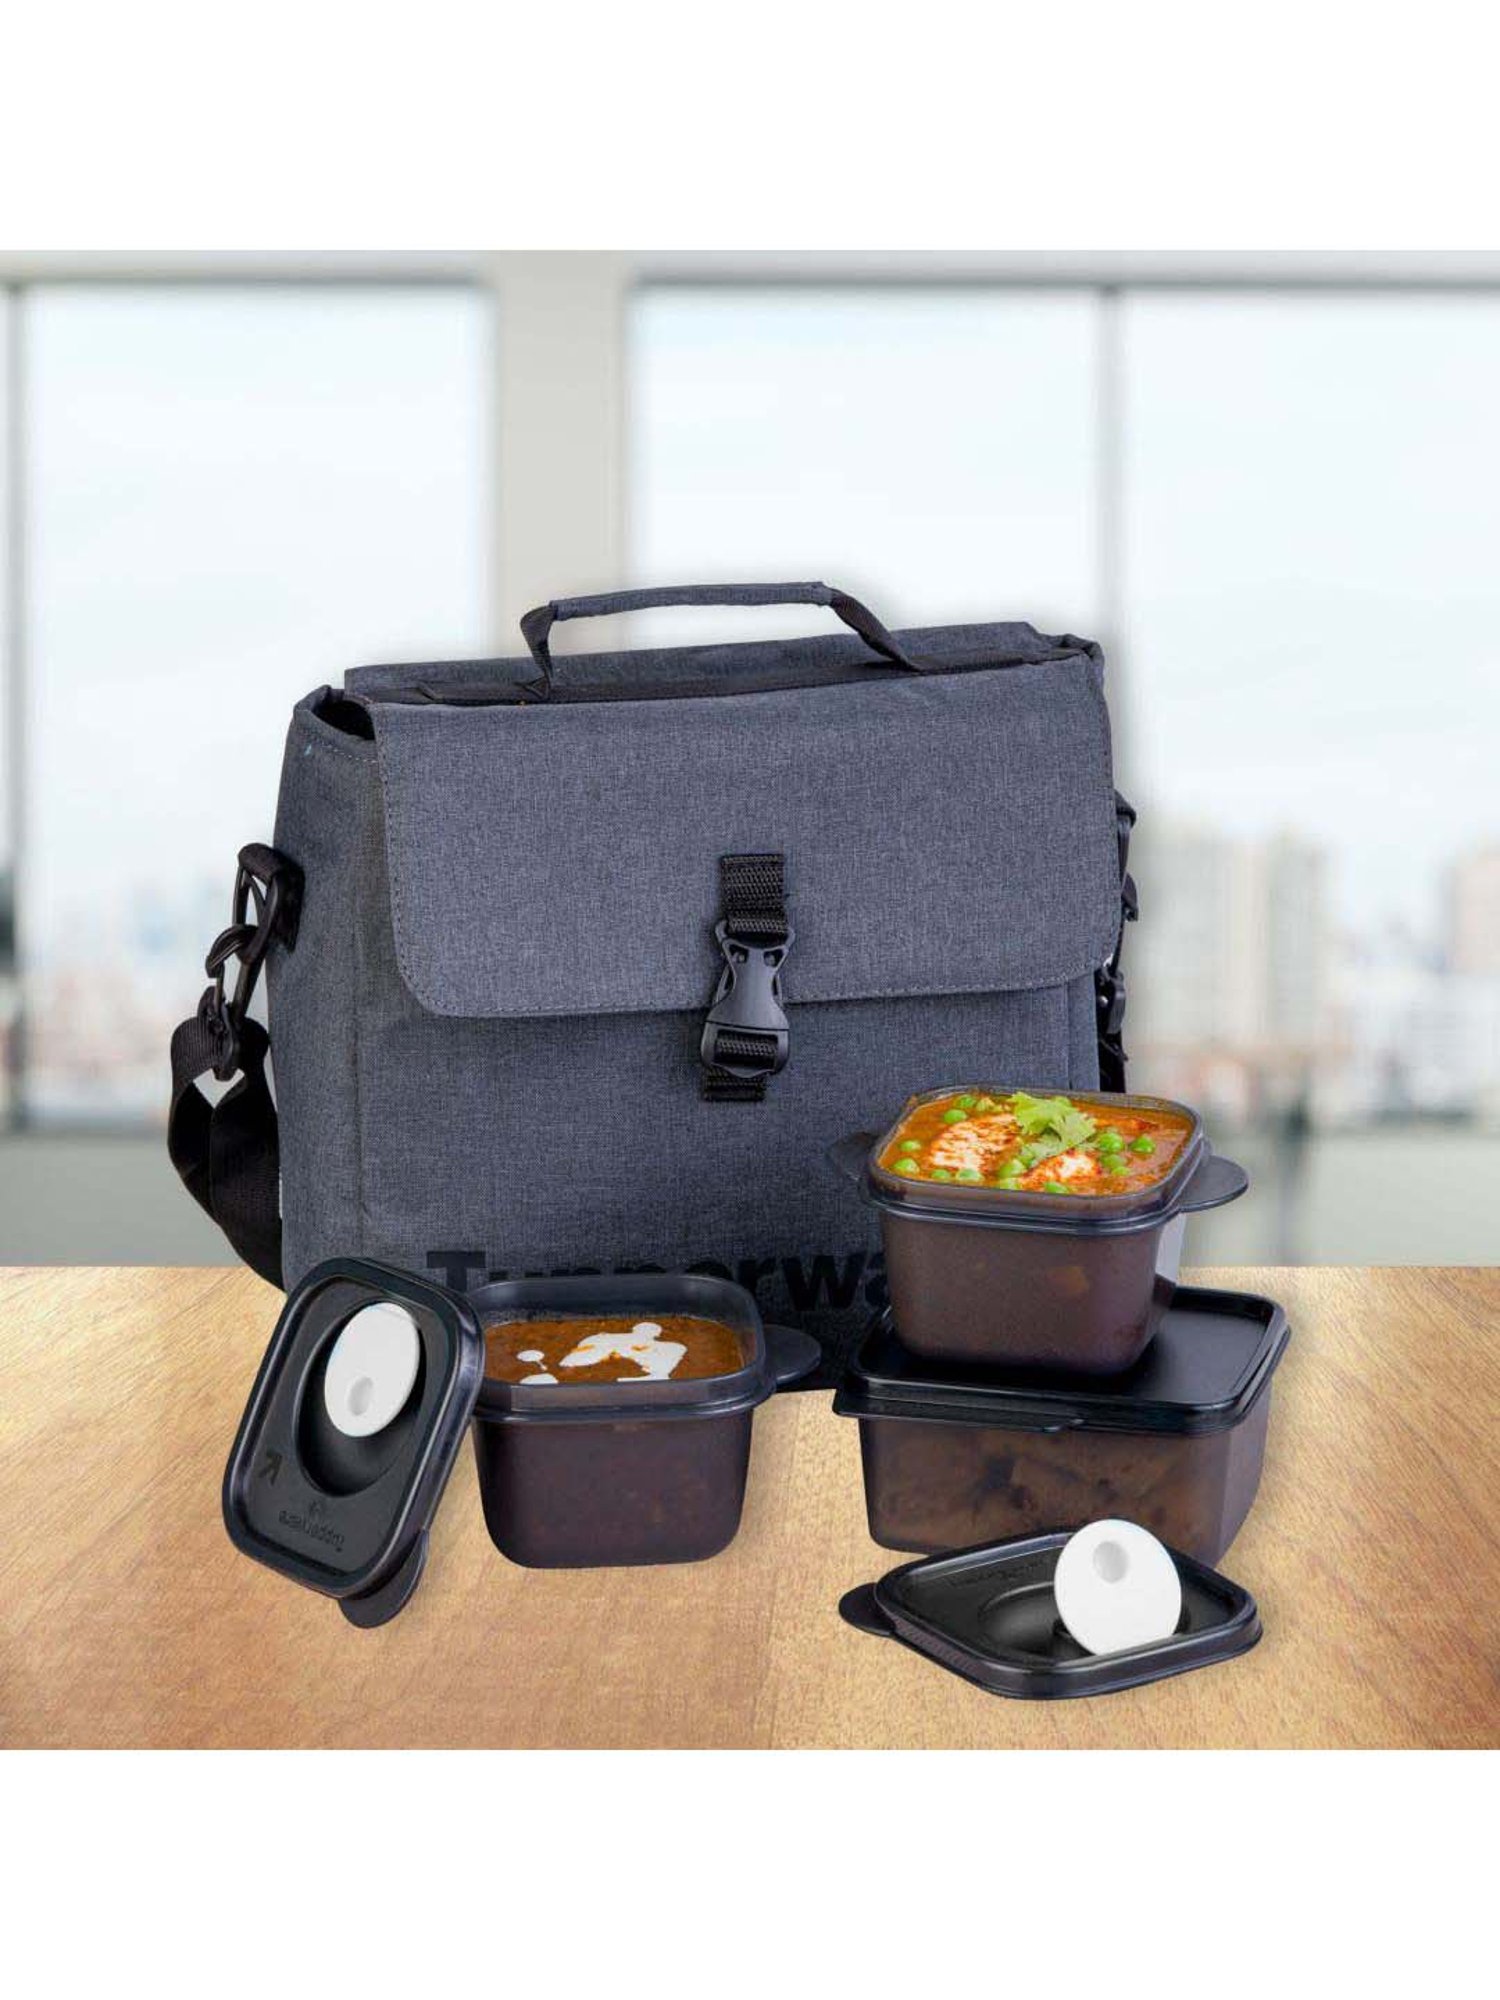 Buy Tupperware Sling A Bling Lunch Box 5 Pcs Online At Best Price of Rs  1225  bigbasket